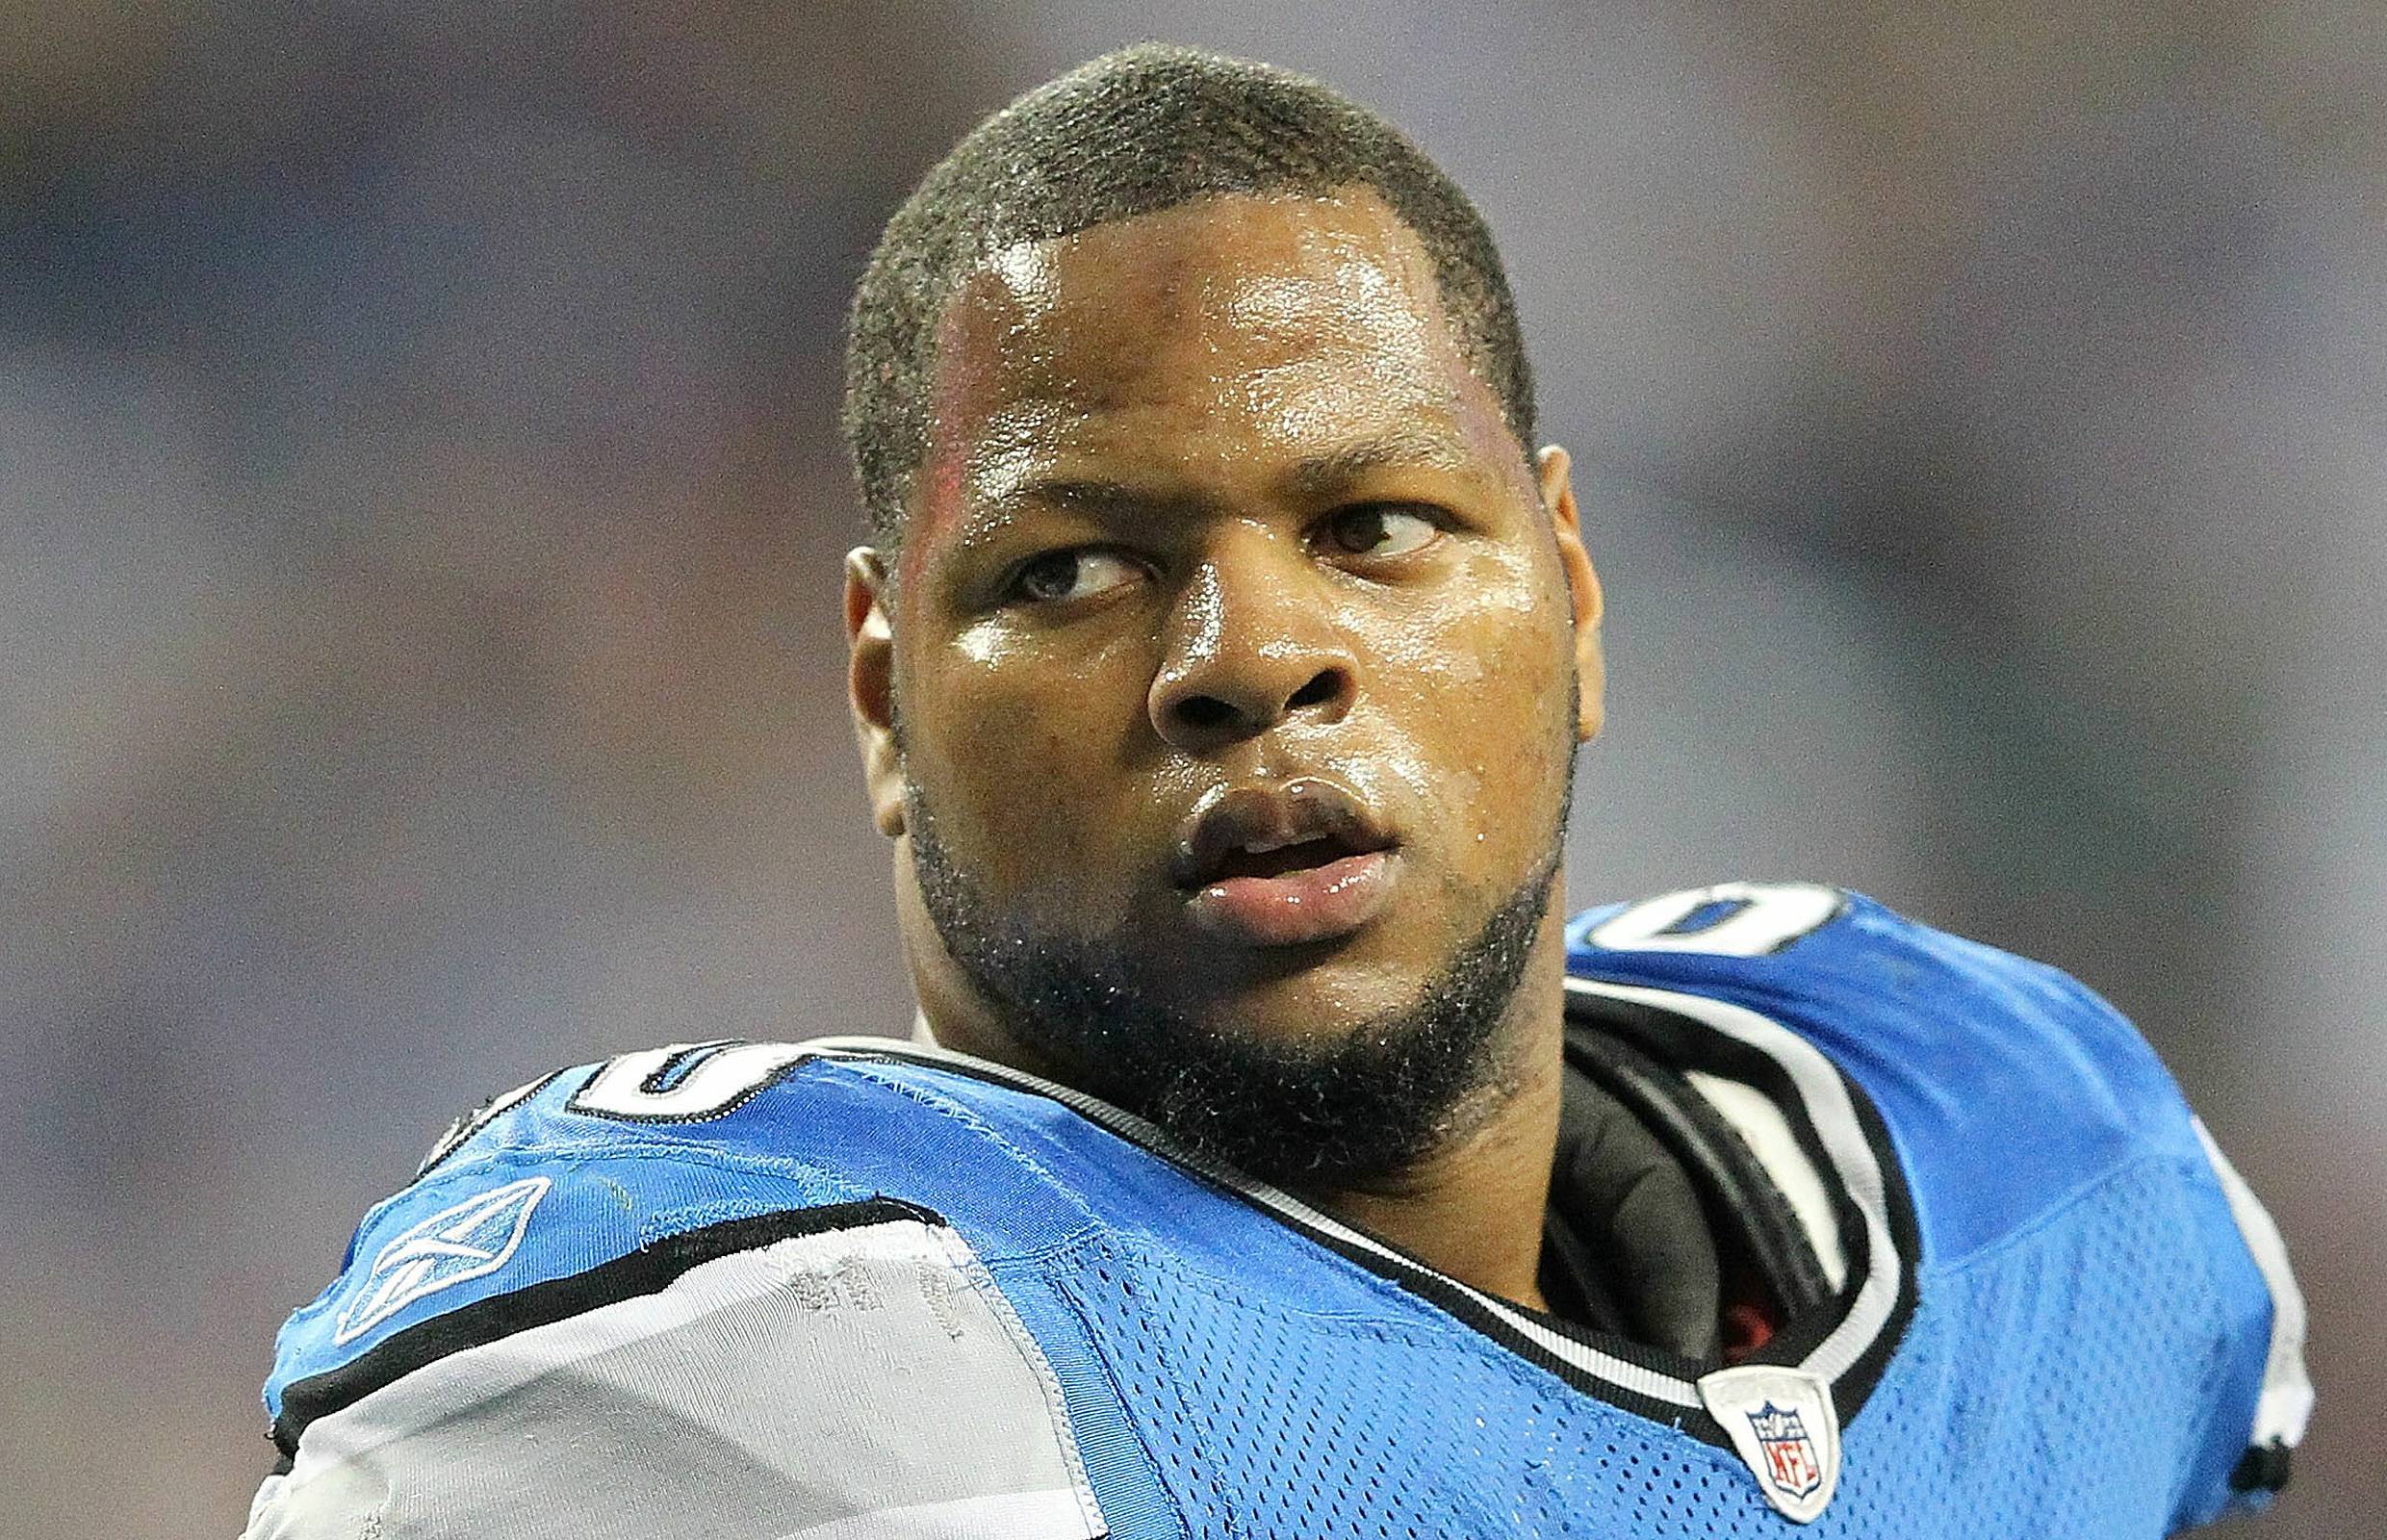 Ndamukong Suh Closed Up Picture Wallpaper. High Quality